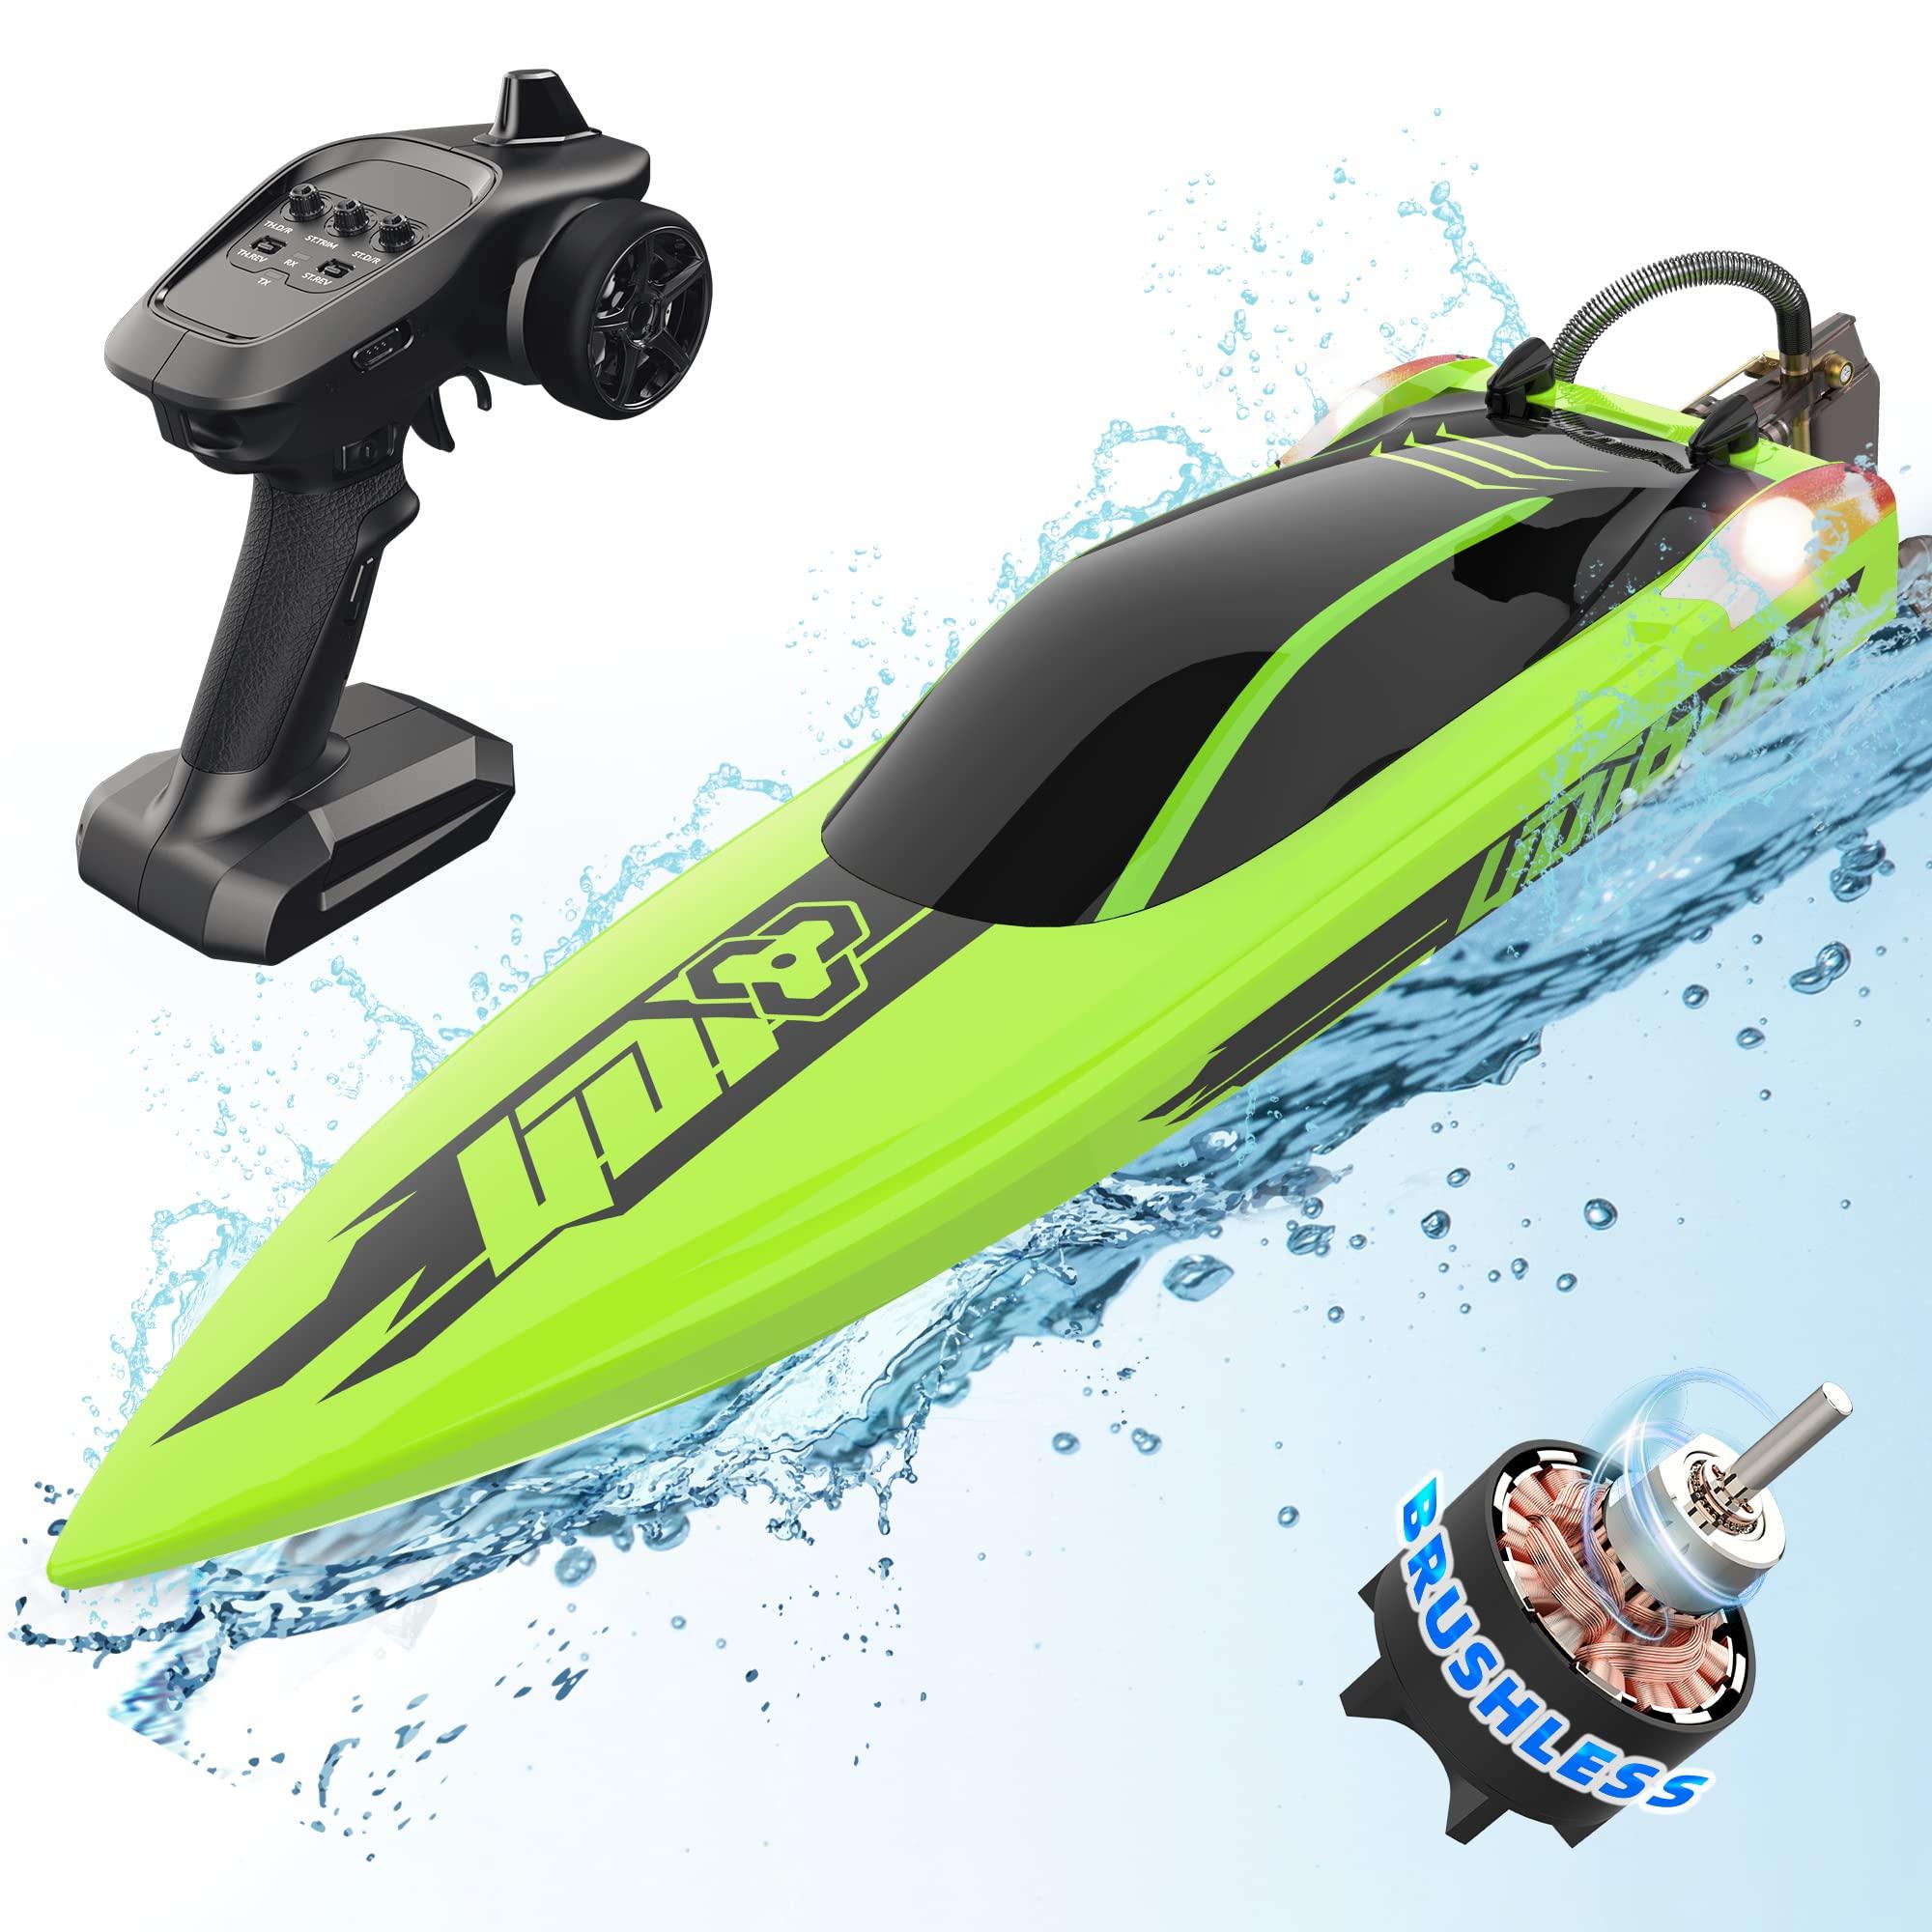 Large Rc Speed Boat: Material Choices for Large RC Speed Boats